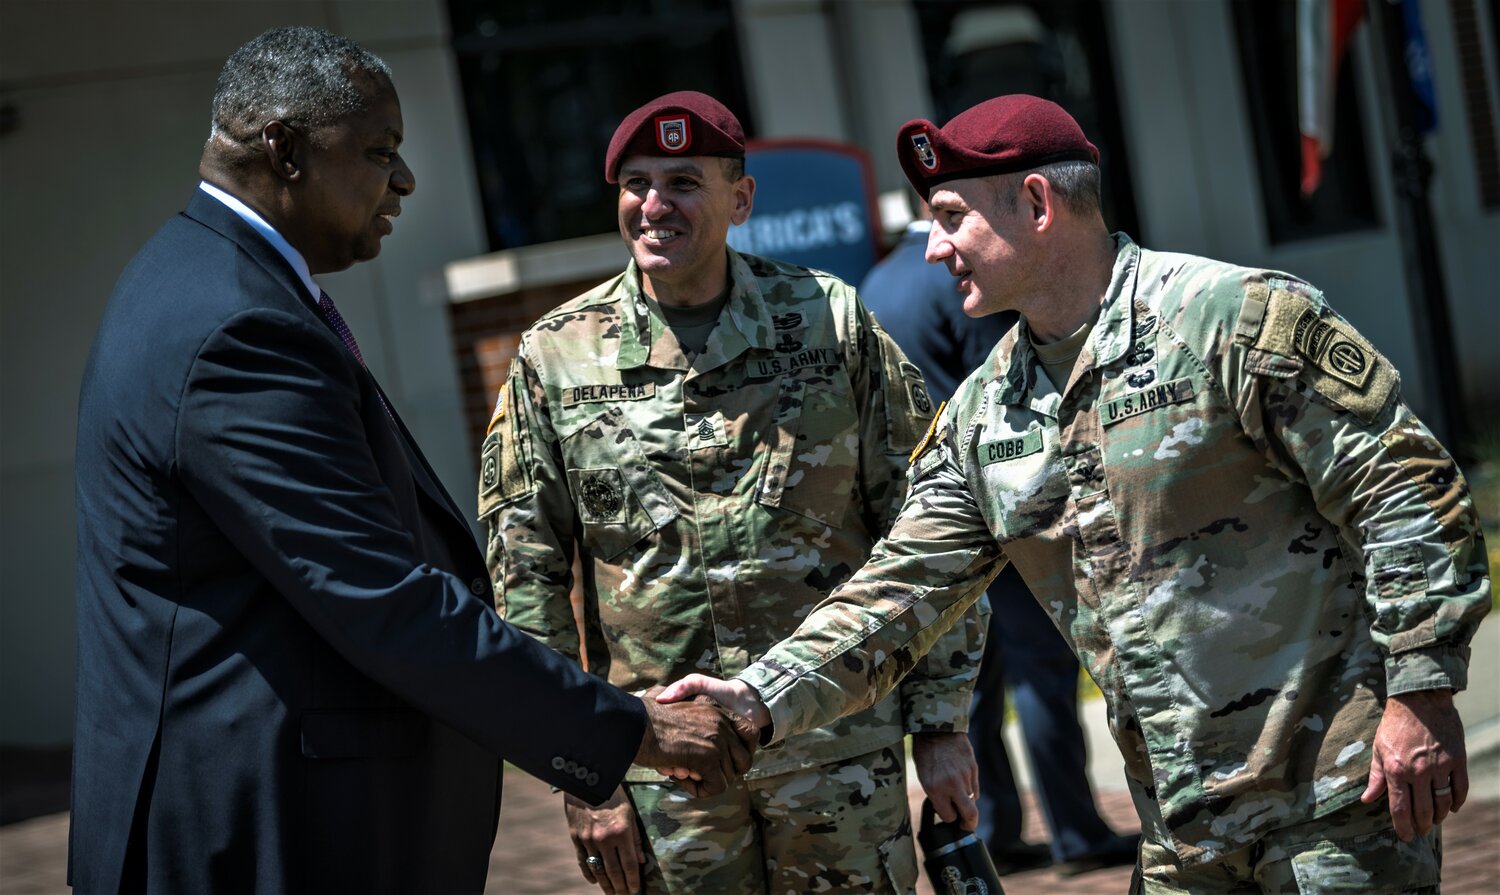 Secretary of Defense Lloyd J. Austin III is greeted by Col. Adam Cobb, chief of staff of the 82nd Airborne Division, and dIvisional Command Sgt. Maj. Randolph Delapena during a visit to Fort Bragg on Friday.